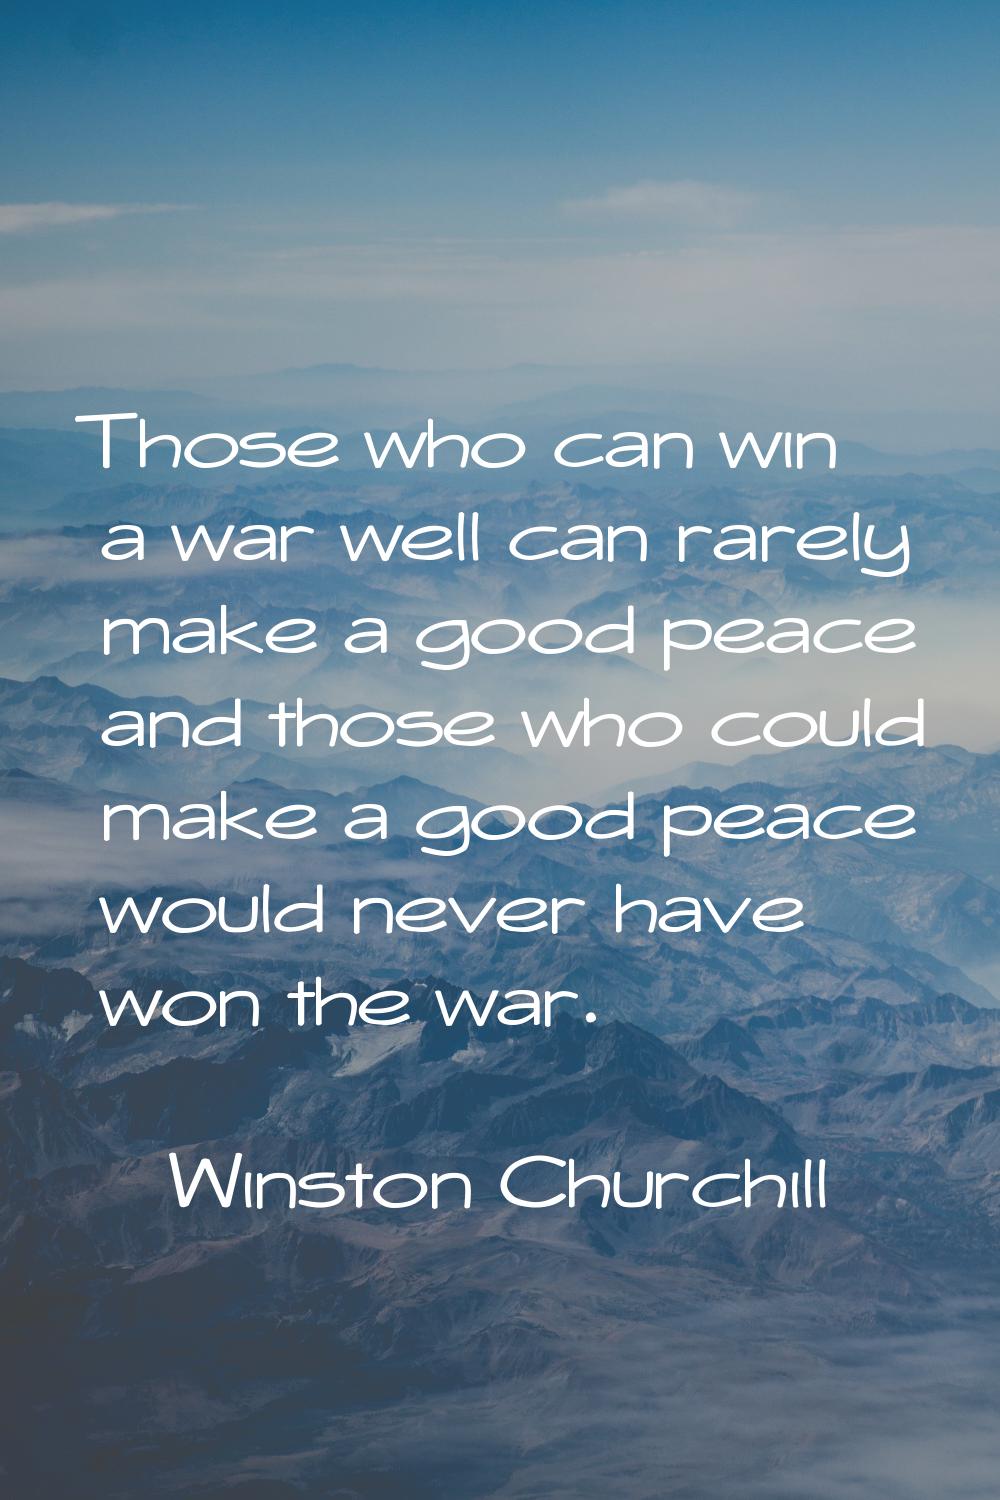 Those who can win a war well can rarely make a good peace and those who could make a good peace wou